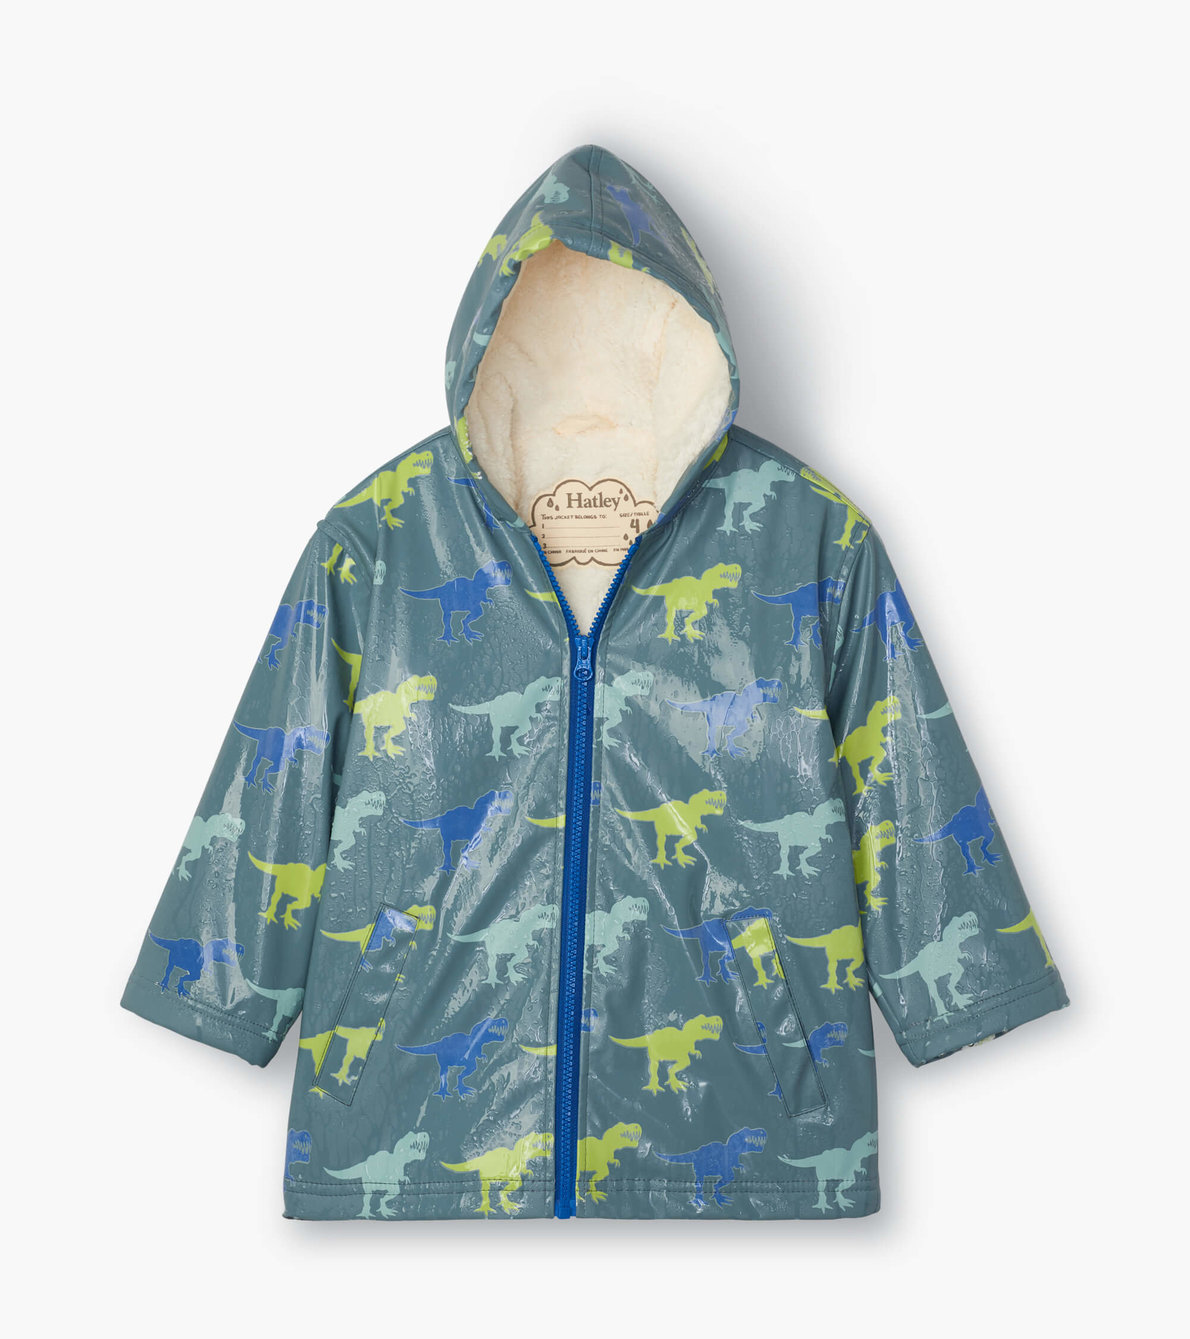 View larger image of T-Rex Sherpa Lined Colour Changing Splash Jacket